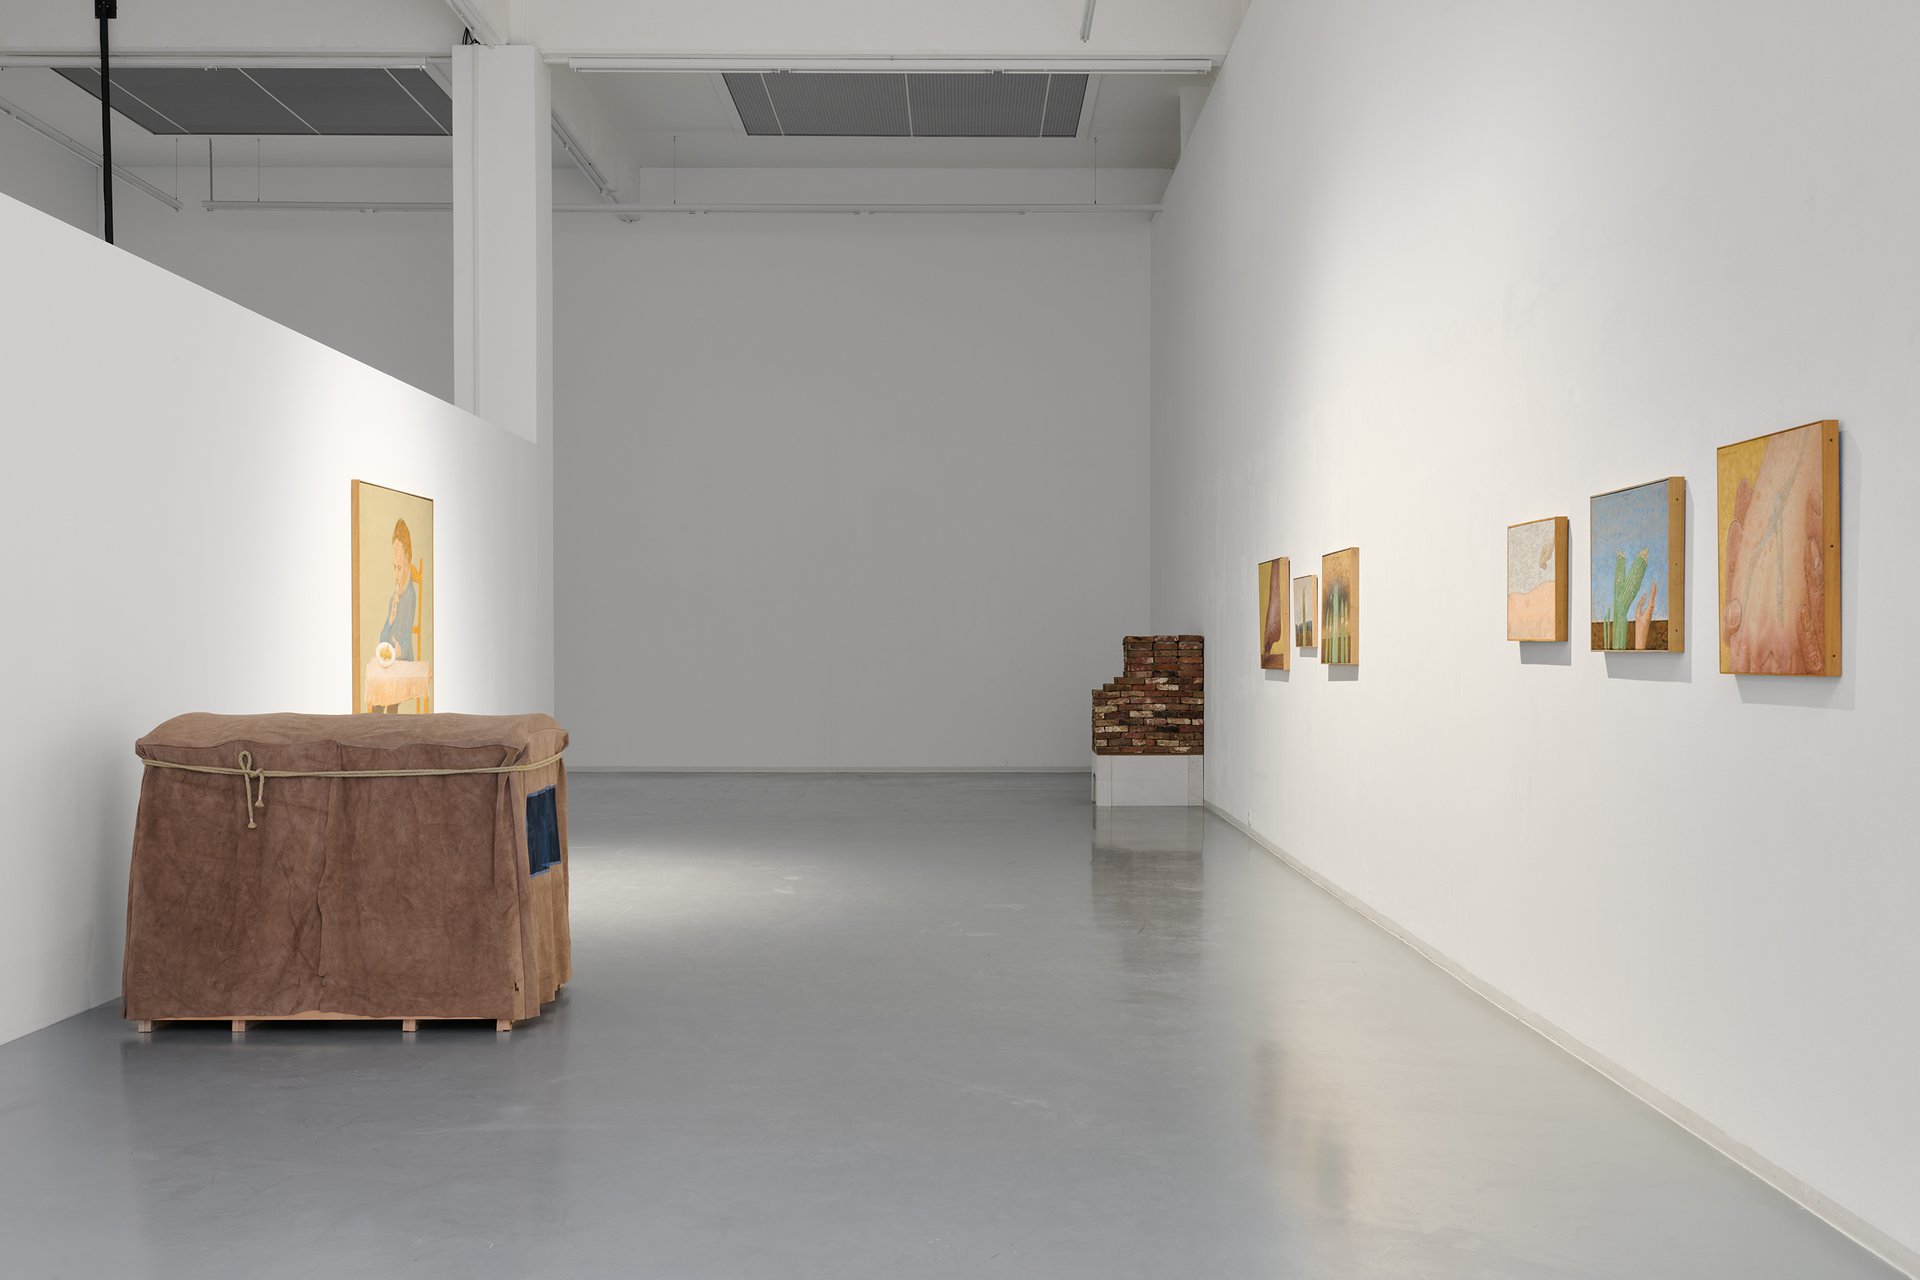 The Holding Environment, Bonner Kunstverein, 2021. Installation view with Michael Kleine and Co Westerik. Photo: Mareike Tocha. Courtesy the artist and Westerik Foundation.